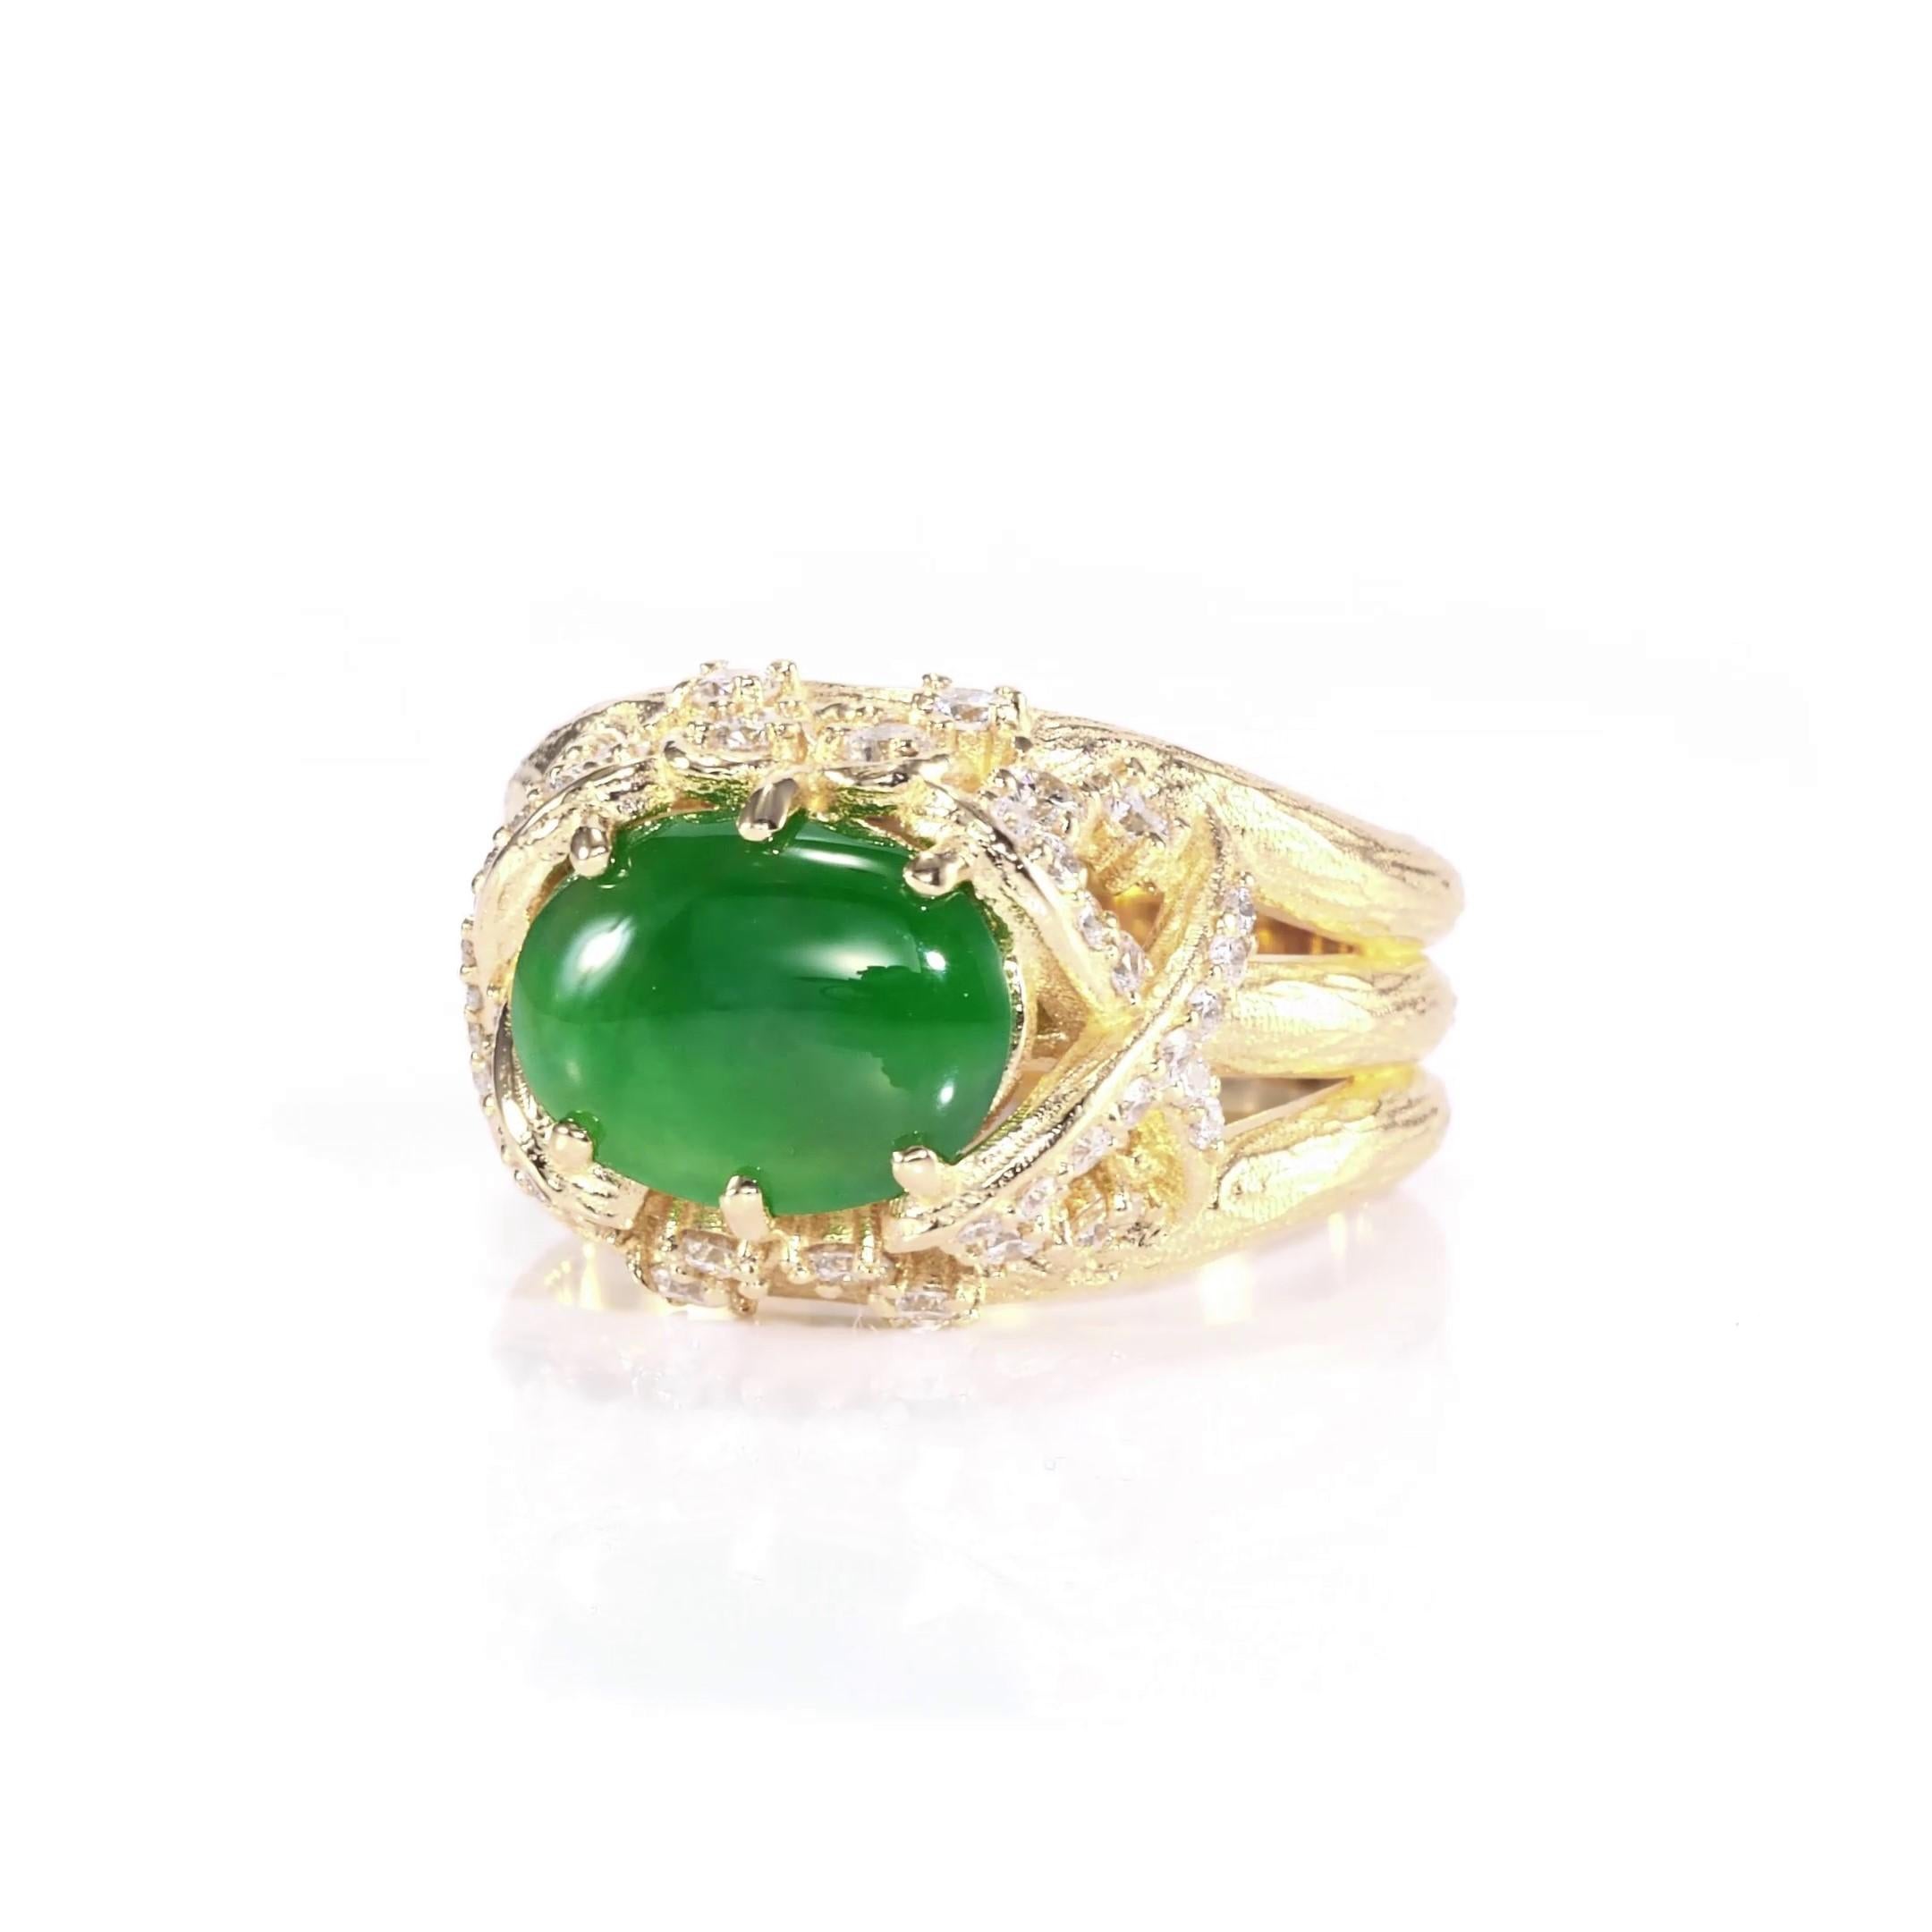 18K Rose / Yellow Gold Ring 9.79gm
Imperial Type A Jadeite Jade 2.30ct
Diamond 0.67ct VS Clarity EF Color
GIA #5201642645
Warmly crafted in 18K rose and yellow gold, this stunning style features a zesty green 2.30ct natural Imperial Jadeite Jade